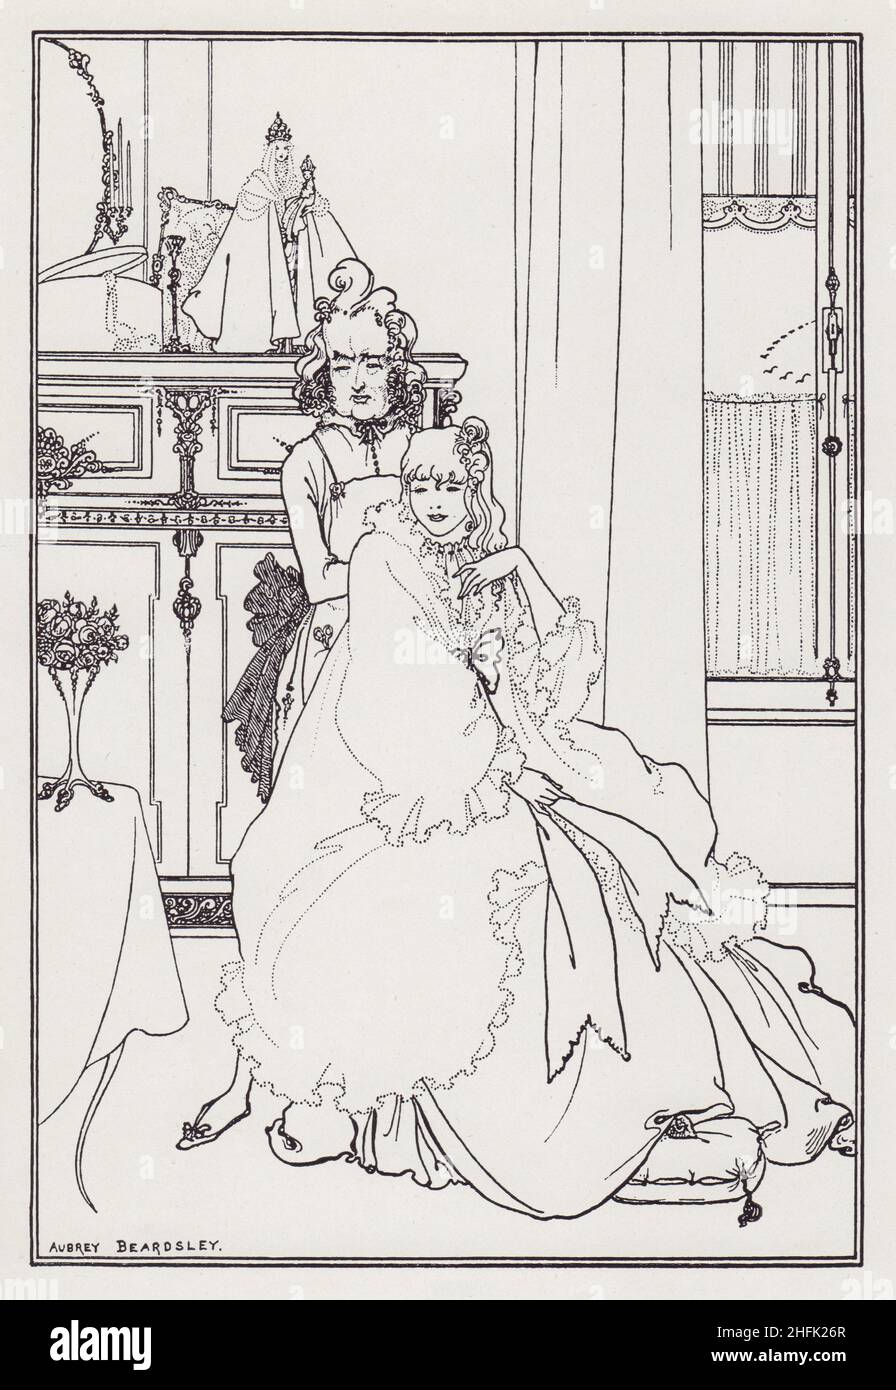 The Coiffing, from The Savoy No. 3, 1896. Woman with her hairdresser. Note diagonal line rising from the footstool to the crown on the Virgin Mary's head. Illustration for Beardsley's poem &quot;The Ballad of the Barber&quot;,  'a carefully wrought and chilling little fable concerning a thirteen year old princess and a Sweeney Todd-like coiffeur who slits her throat with the jagged glass of a broken bottle of cologne, and then creeps away &quot;on pointed feet&quot;'. Published in &quot;The Best of Beardsley&quot; edited by R. A. Walker, [The Bodley Head, London, 1948] Stock Photo